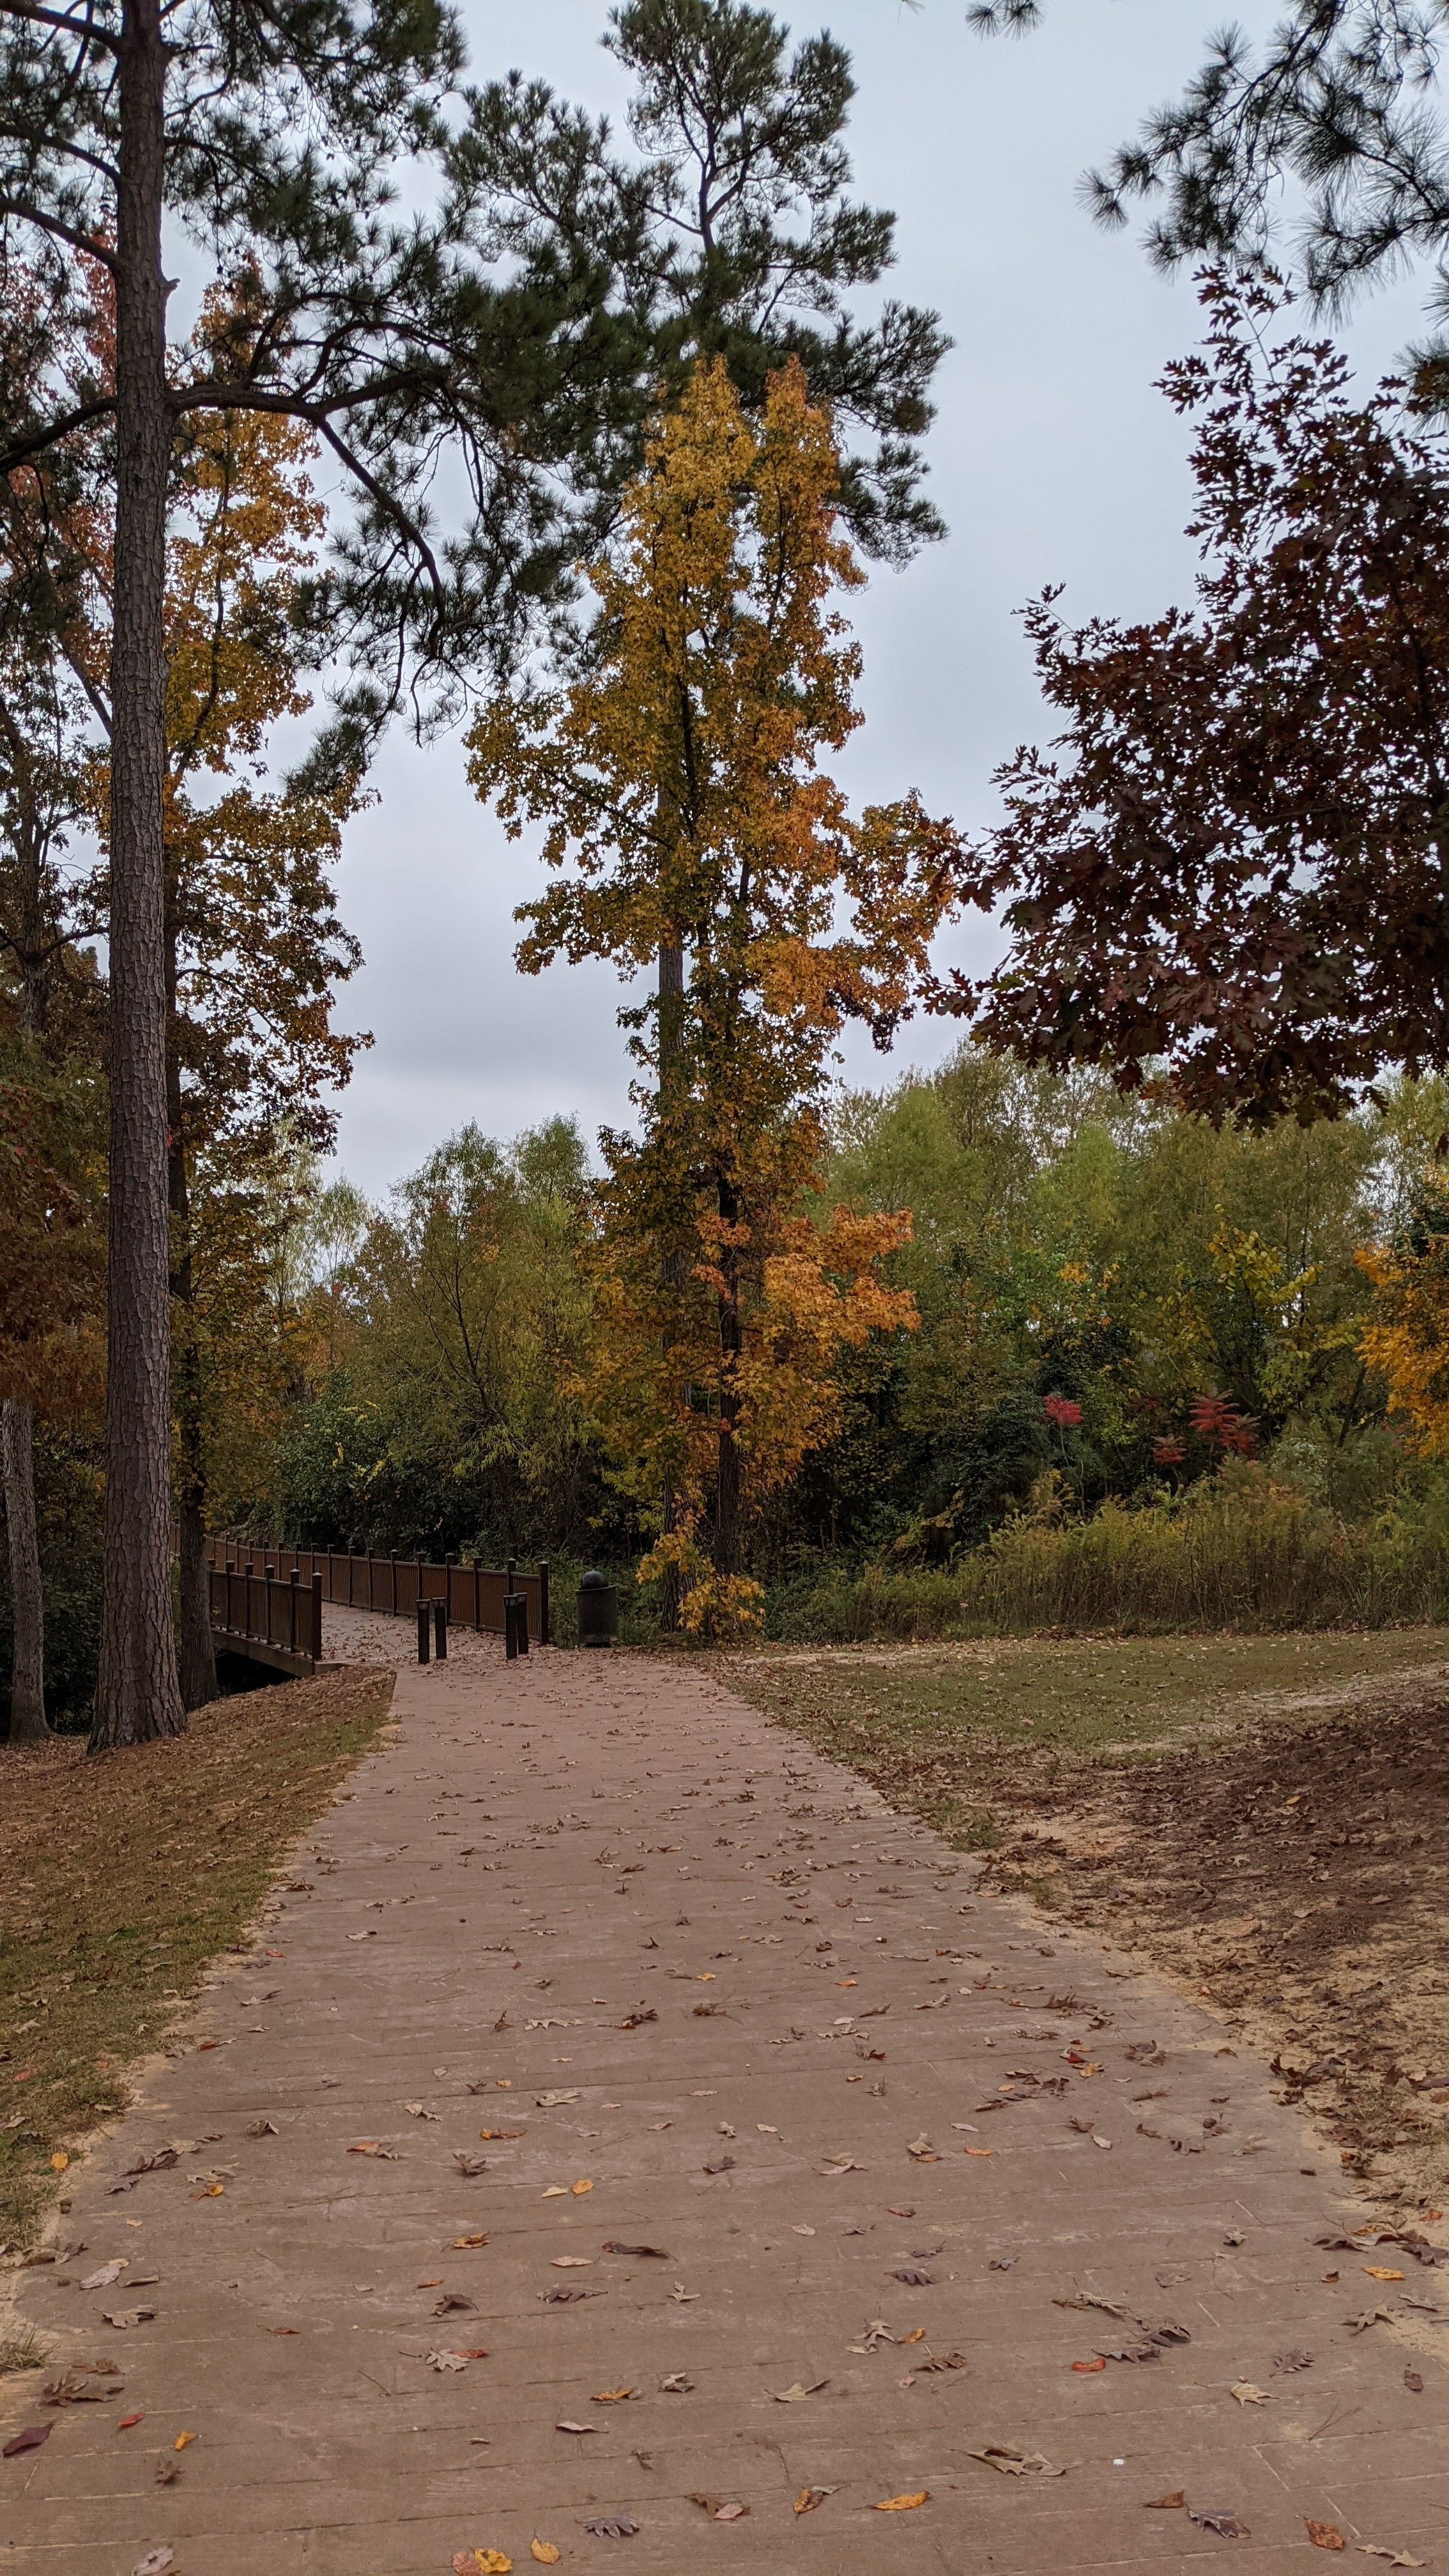 A sample image from the Pixel 5. A walking path and tree with yellow leaves in the distance